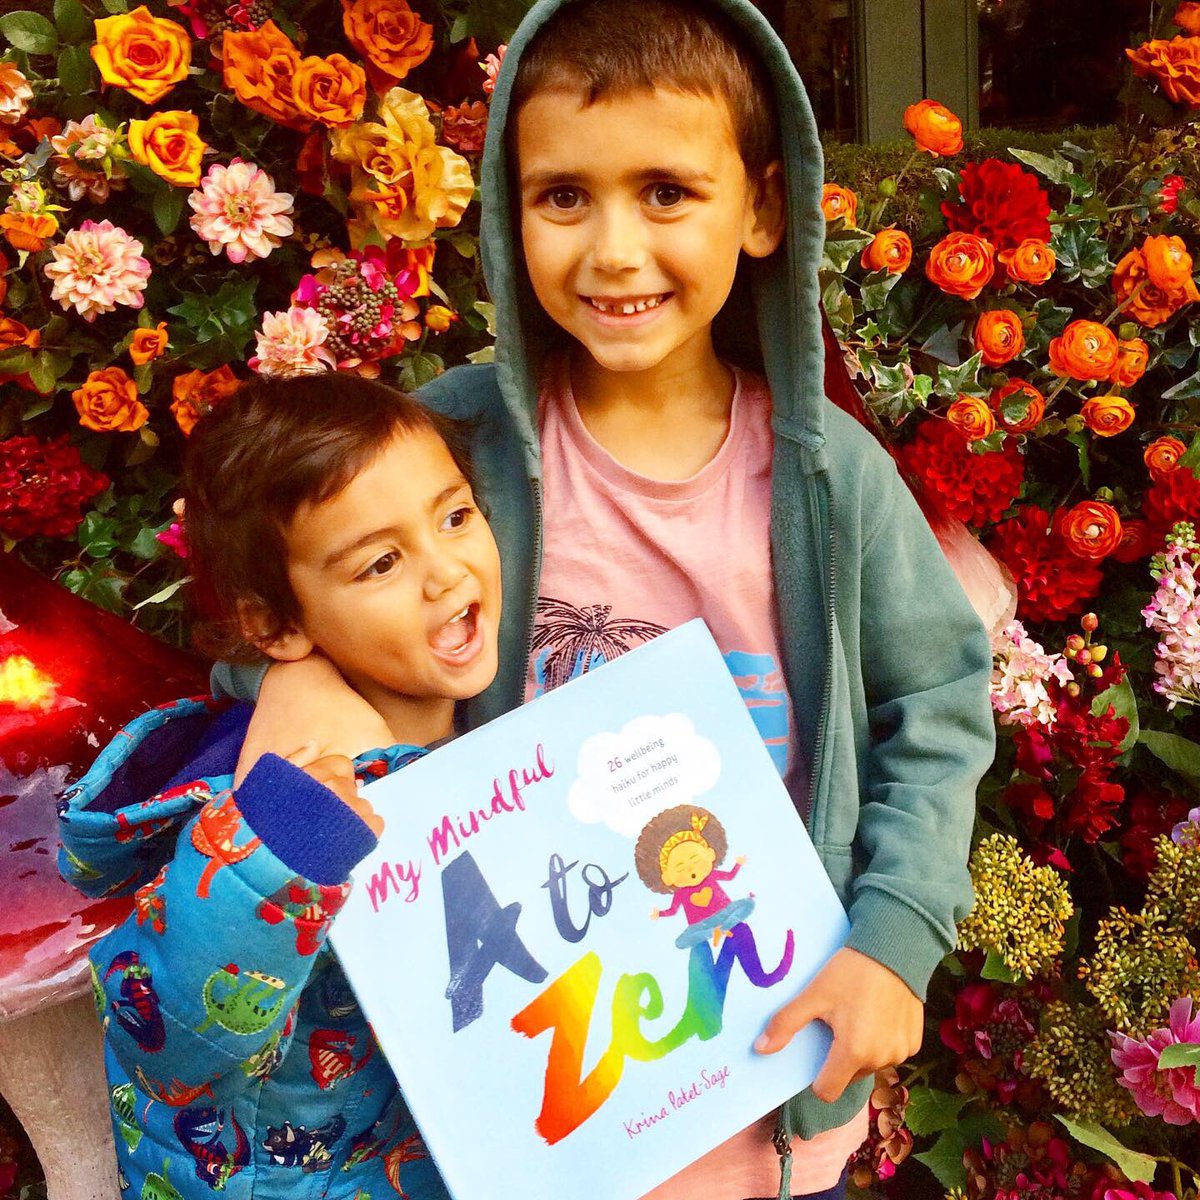 It’s pub day for this beauty. Here are my little cheerleaders with Mummy’s happiness handbook. Hope you enjoy it! 🎉🌈🥳🙏🏾
#publicationday #picturebook #Mindfulness #mindfulnessforkids #Wellbeing #childrensmentalhealth #kidsbook #childrensbook